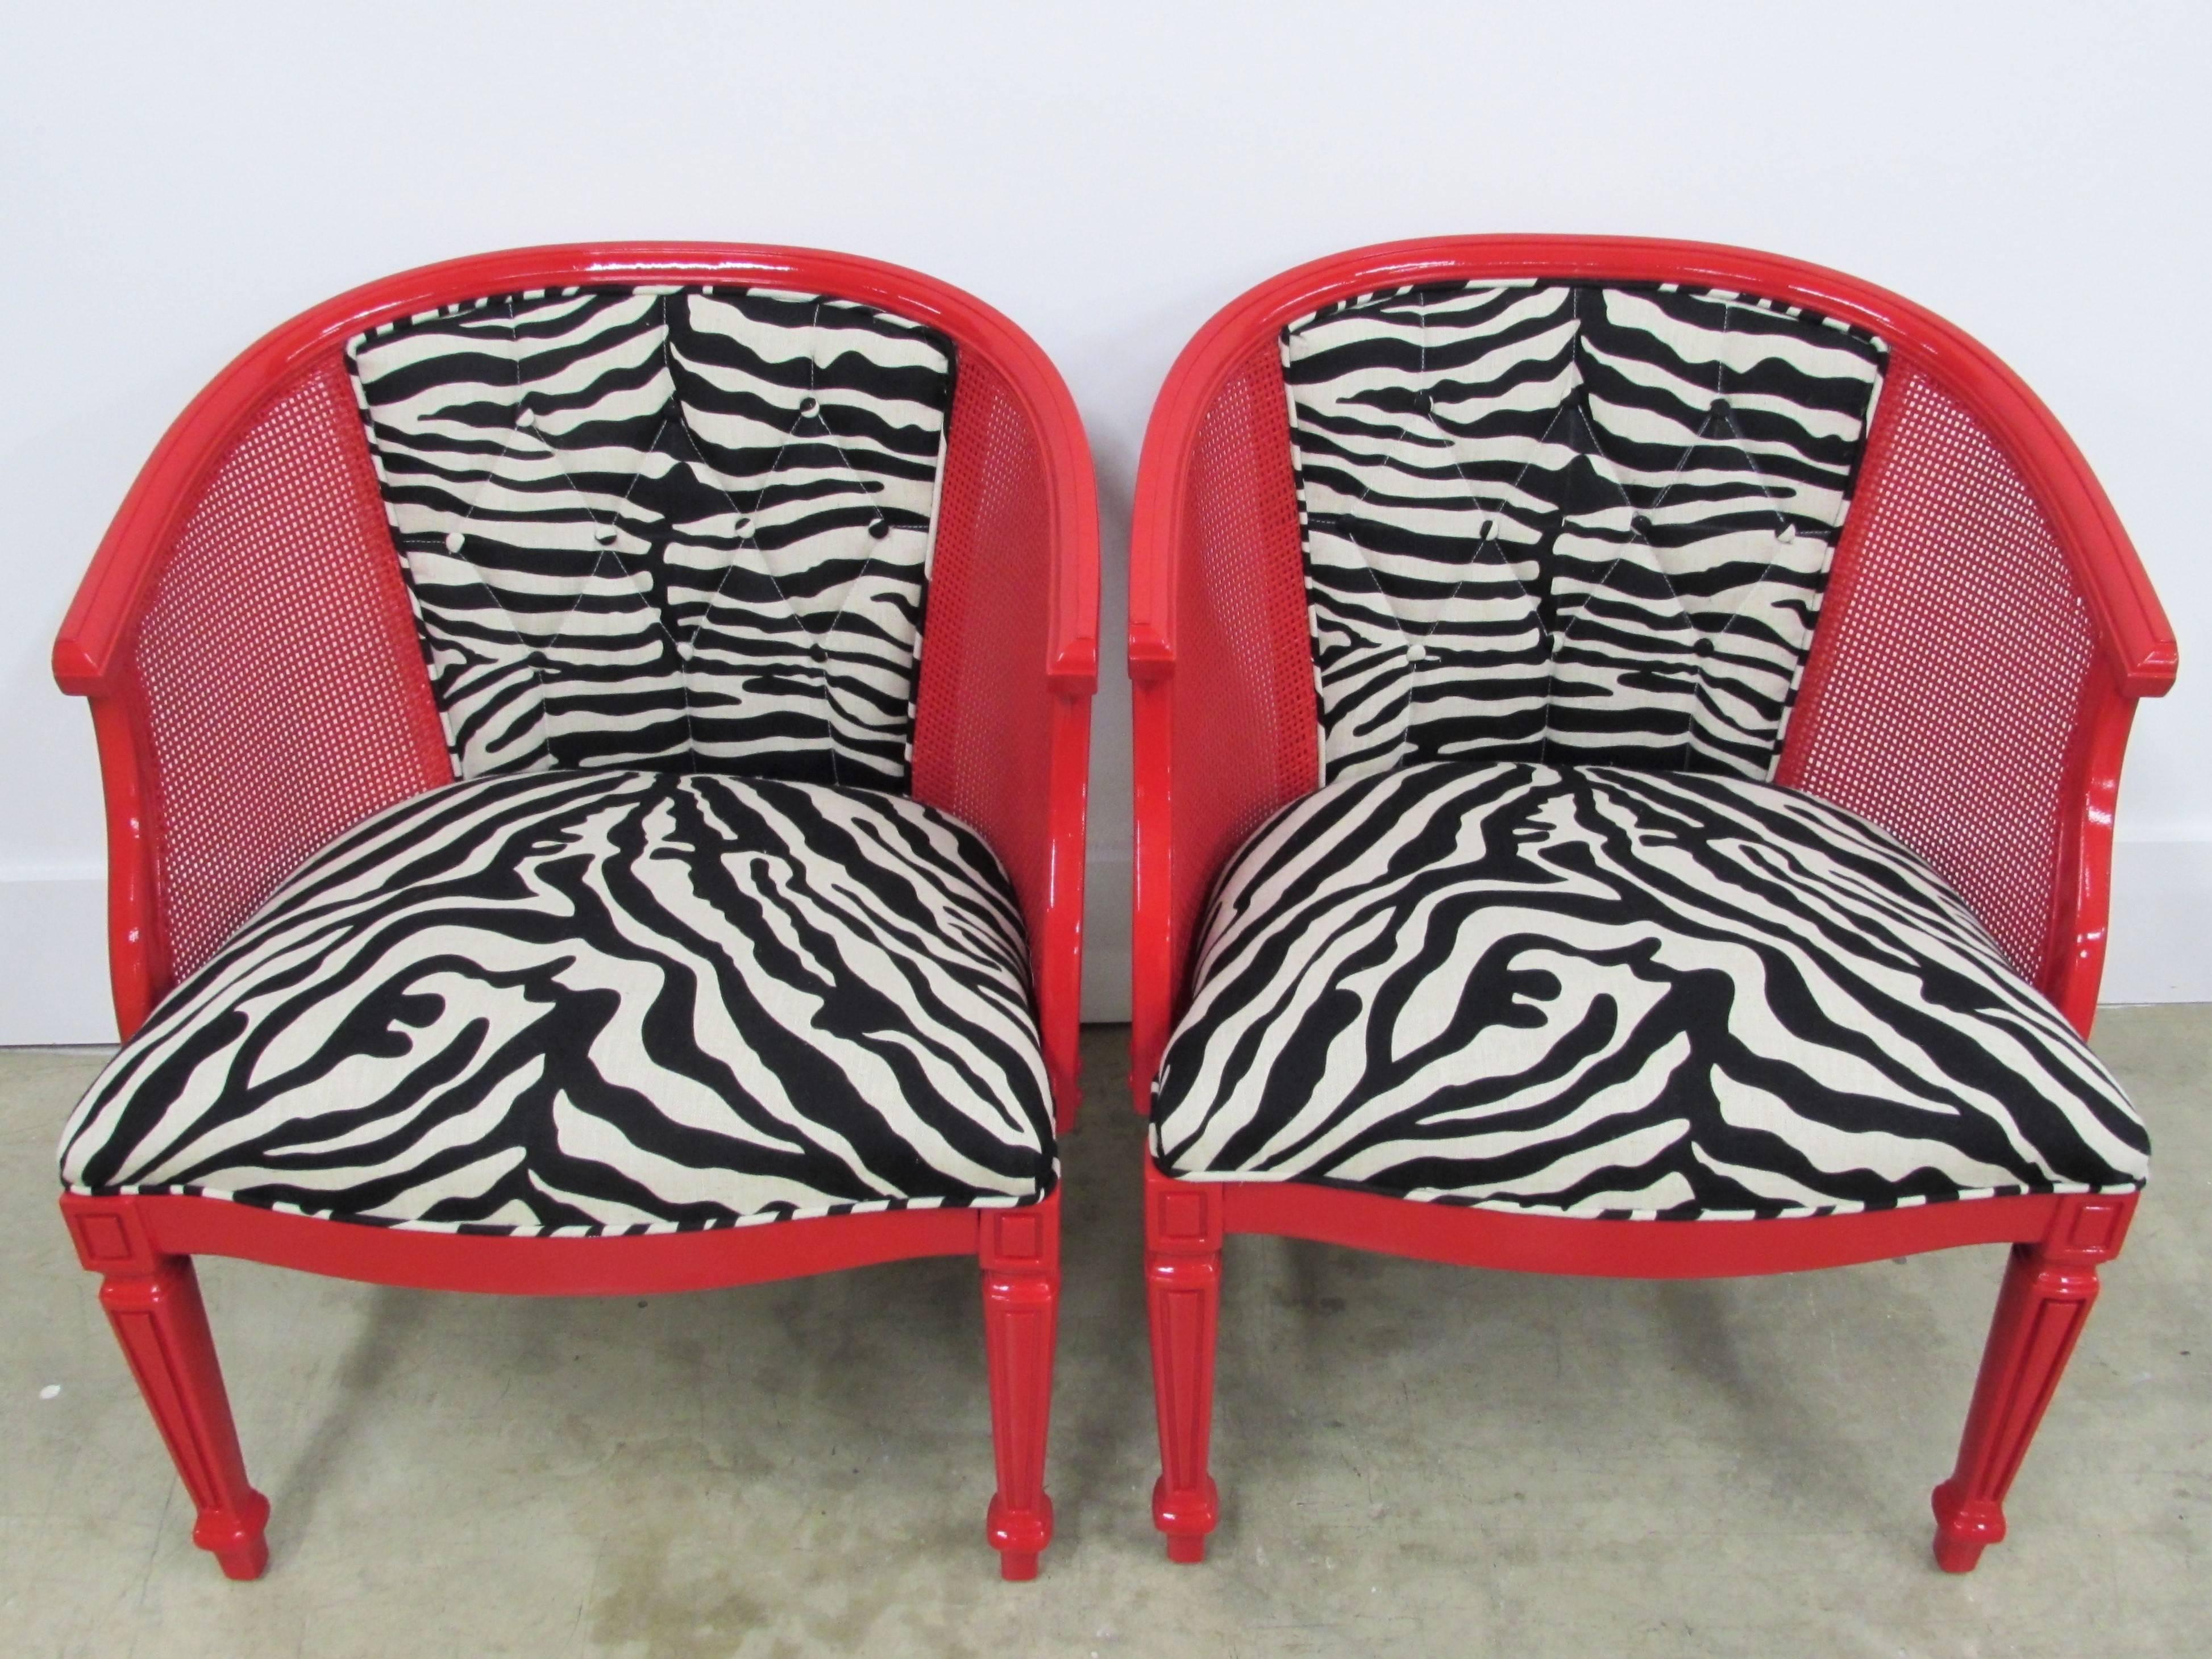 A pair of Baker-style mahogany barrel back cane chairs lacquered In-house in Benjamin Moore Heritage red gloss finish, newly upholstered in William Sonoma Linen Zebra fabric, the back is tufted in a diamond pattern with buttons and single